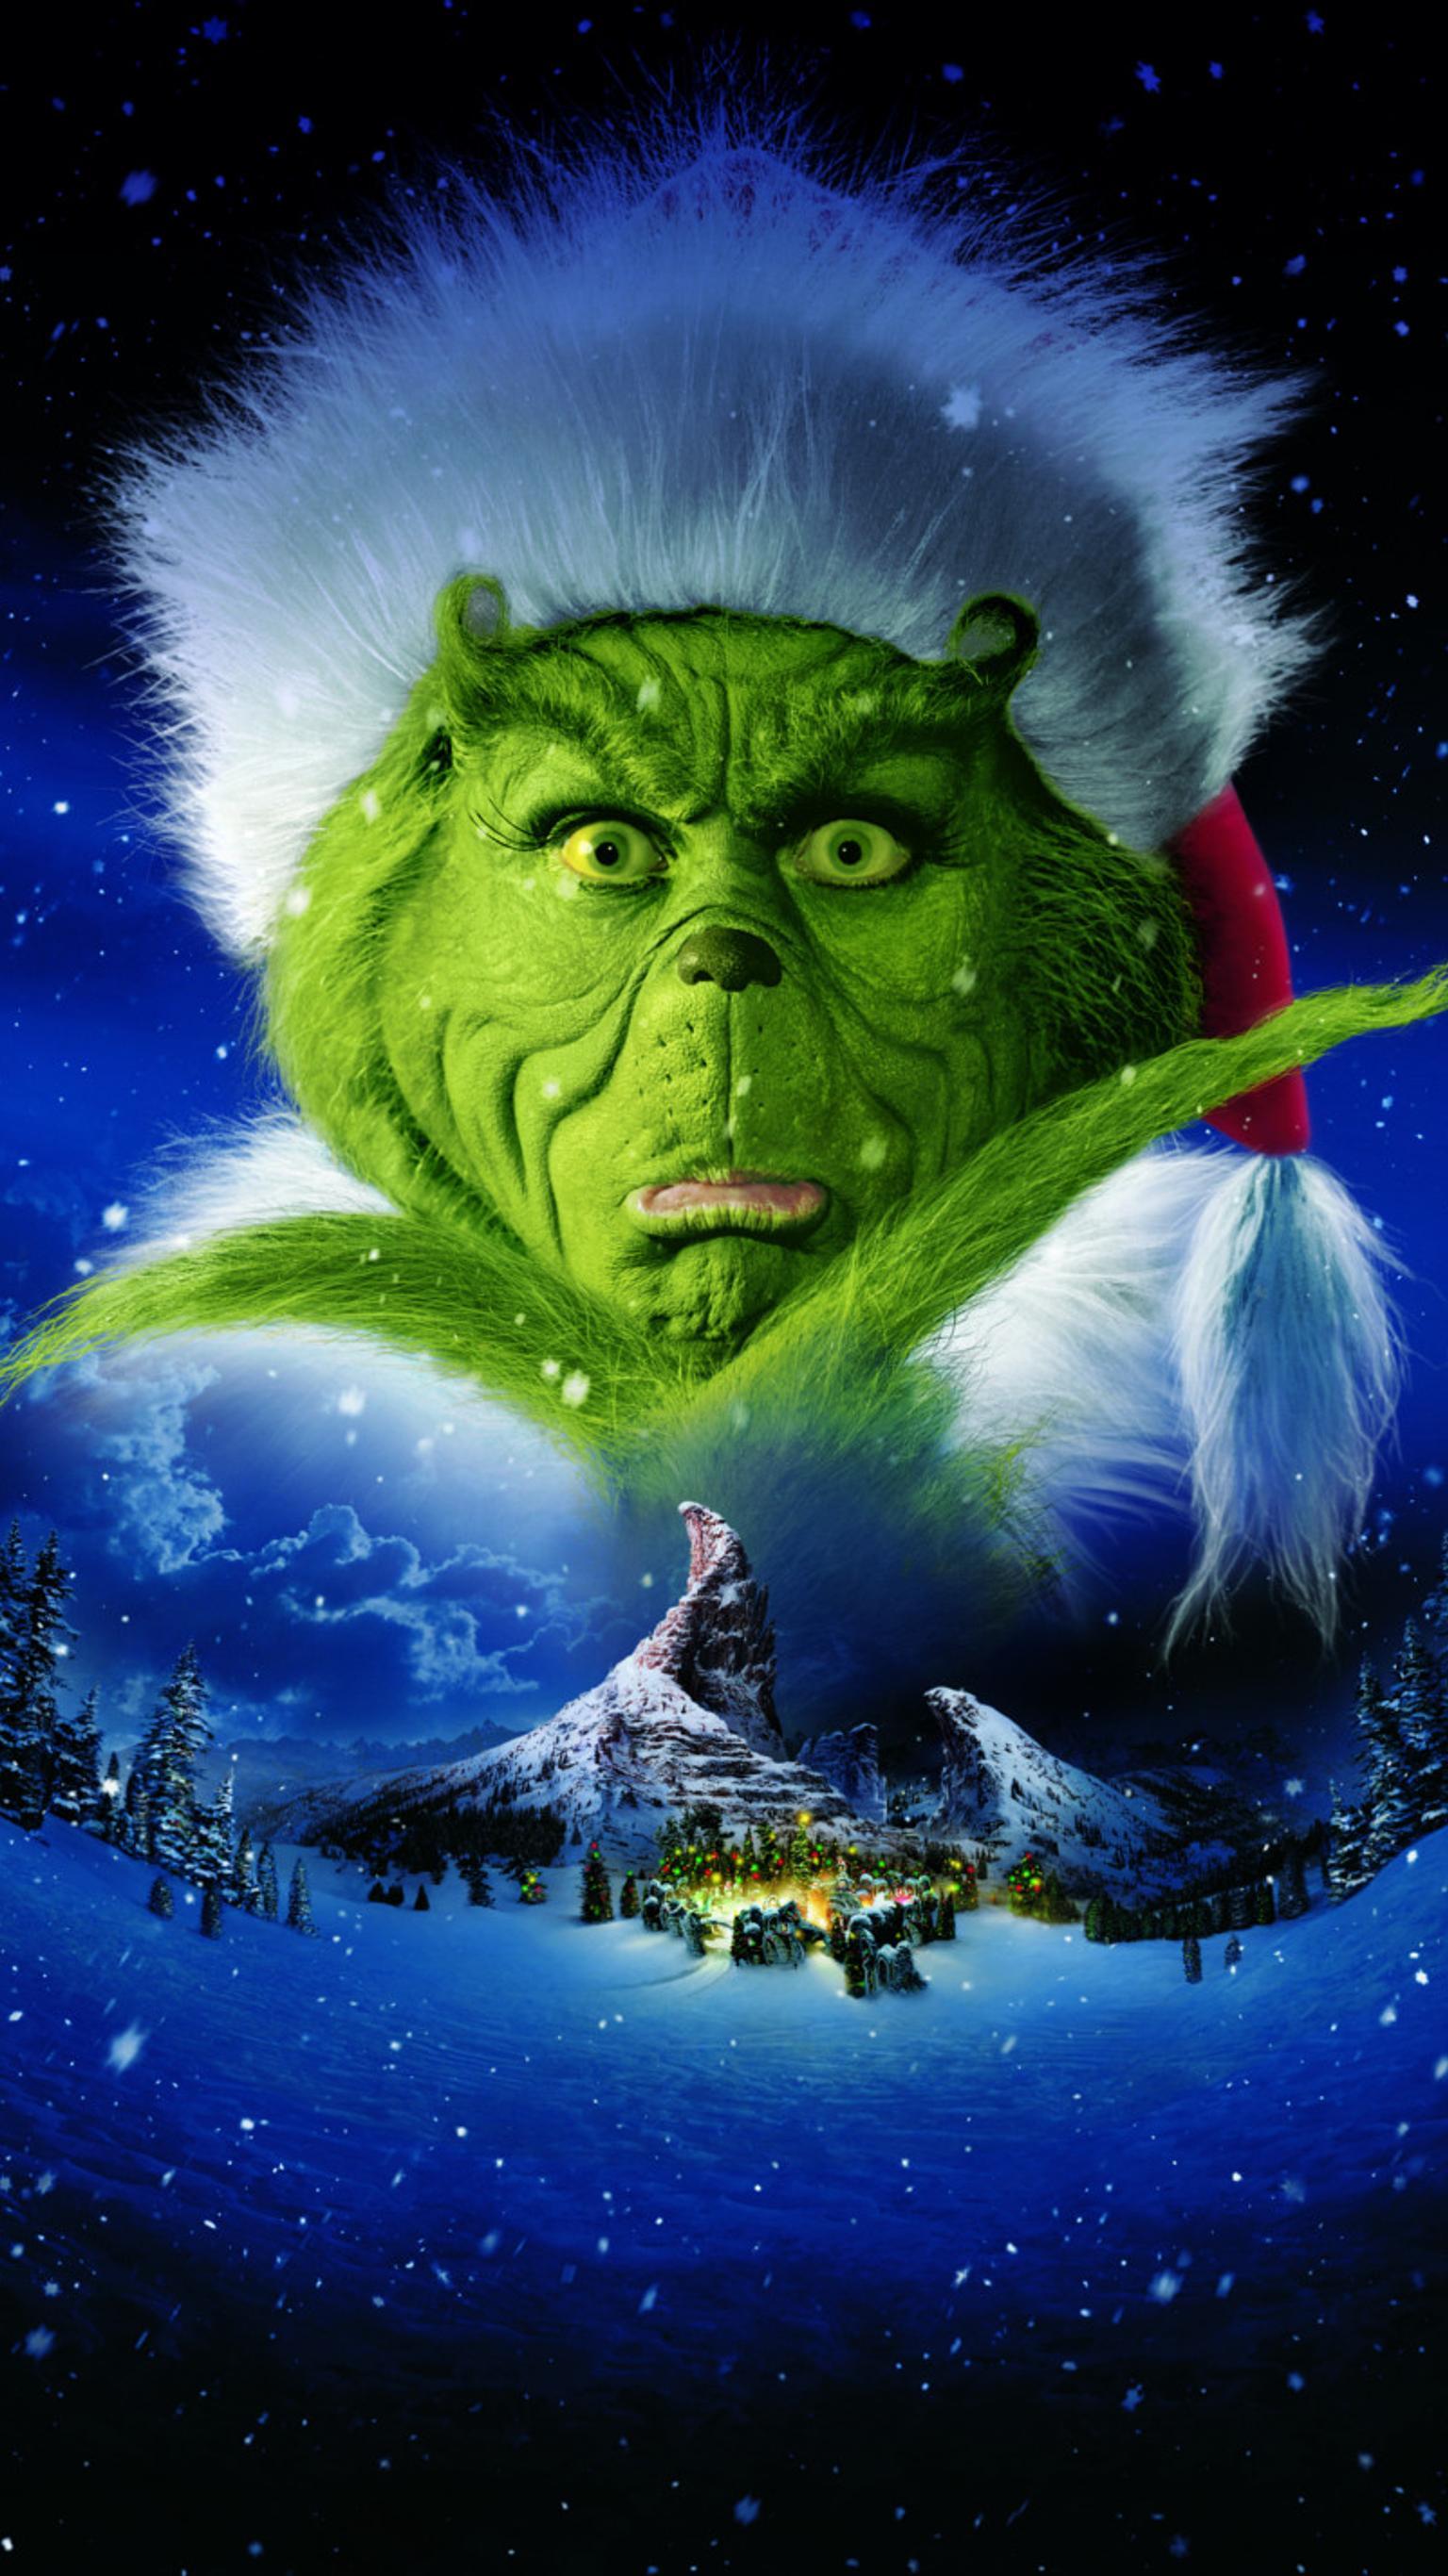 Download Embrace The Christmas Spirit With A Grinch Themed Iphone Wallpaper   Wallpaperscom